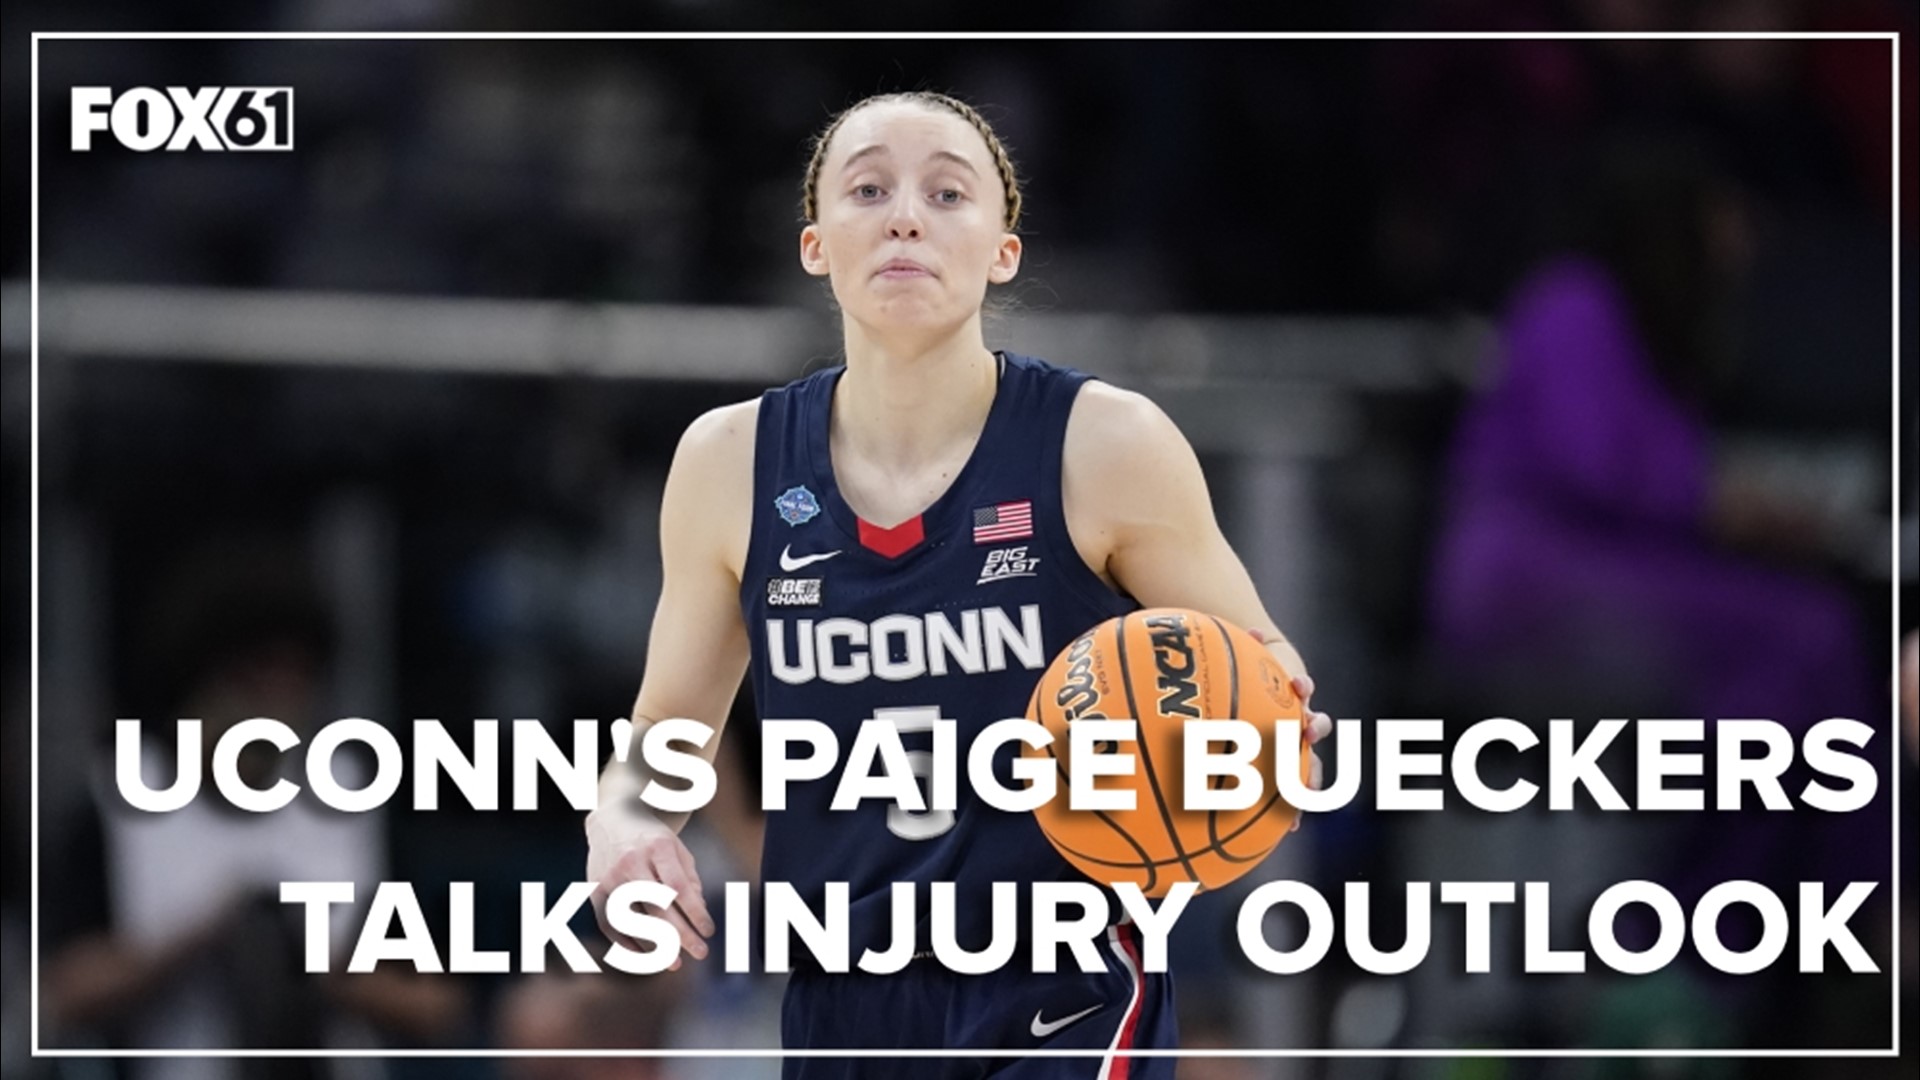 About a month ago, Paige Bueckers suffered a torn ACL during a basketball game, leading to her absence from the next season.